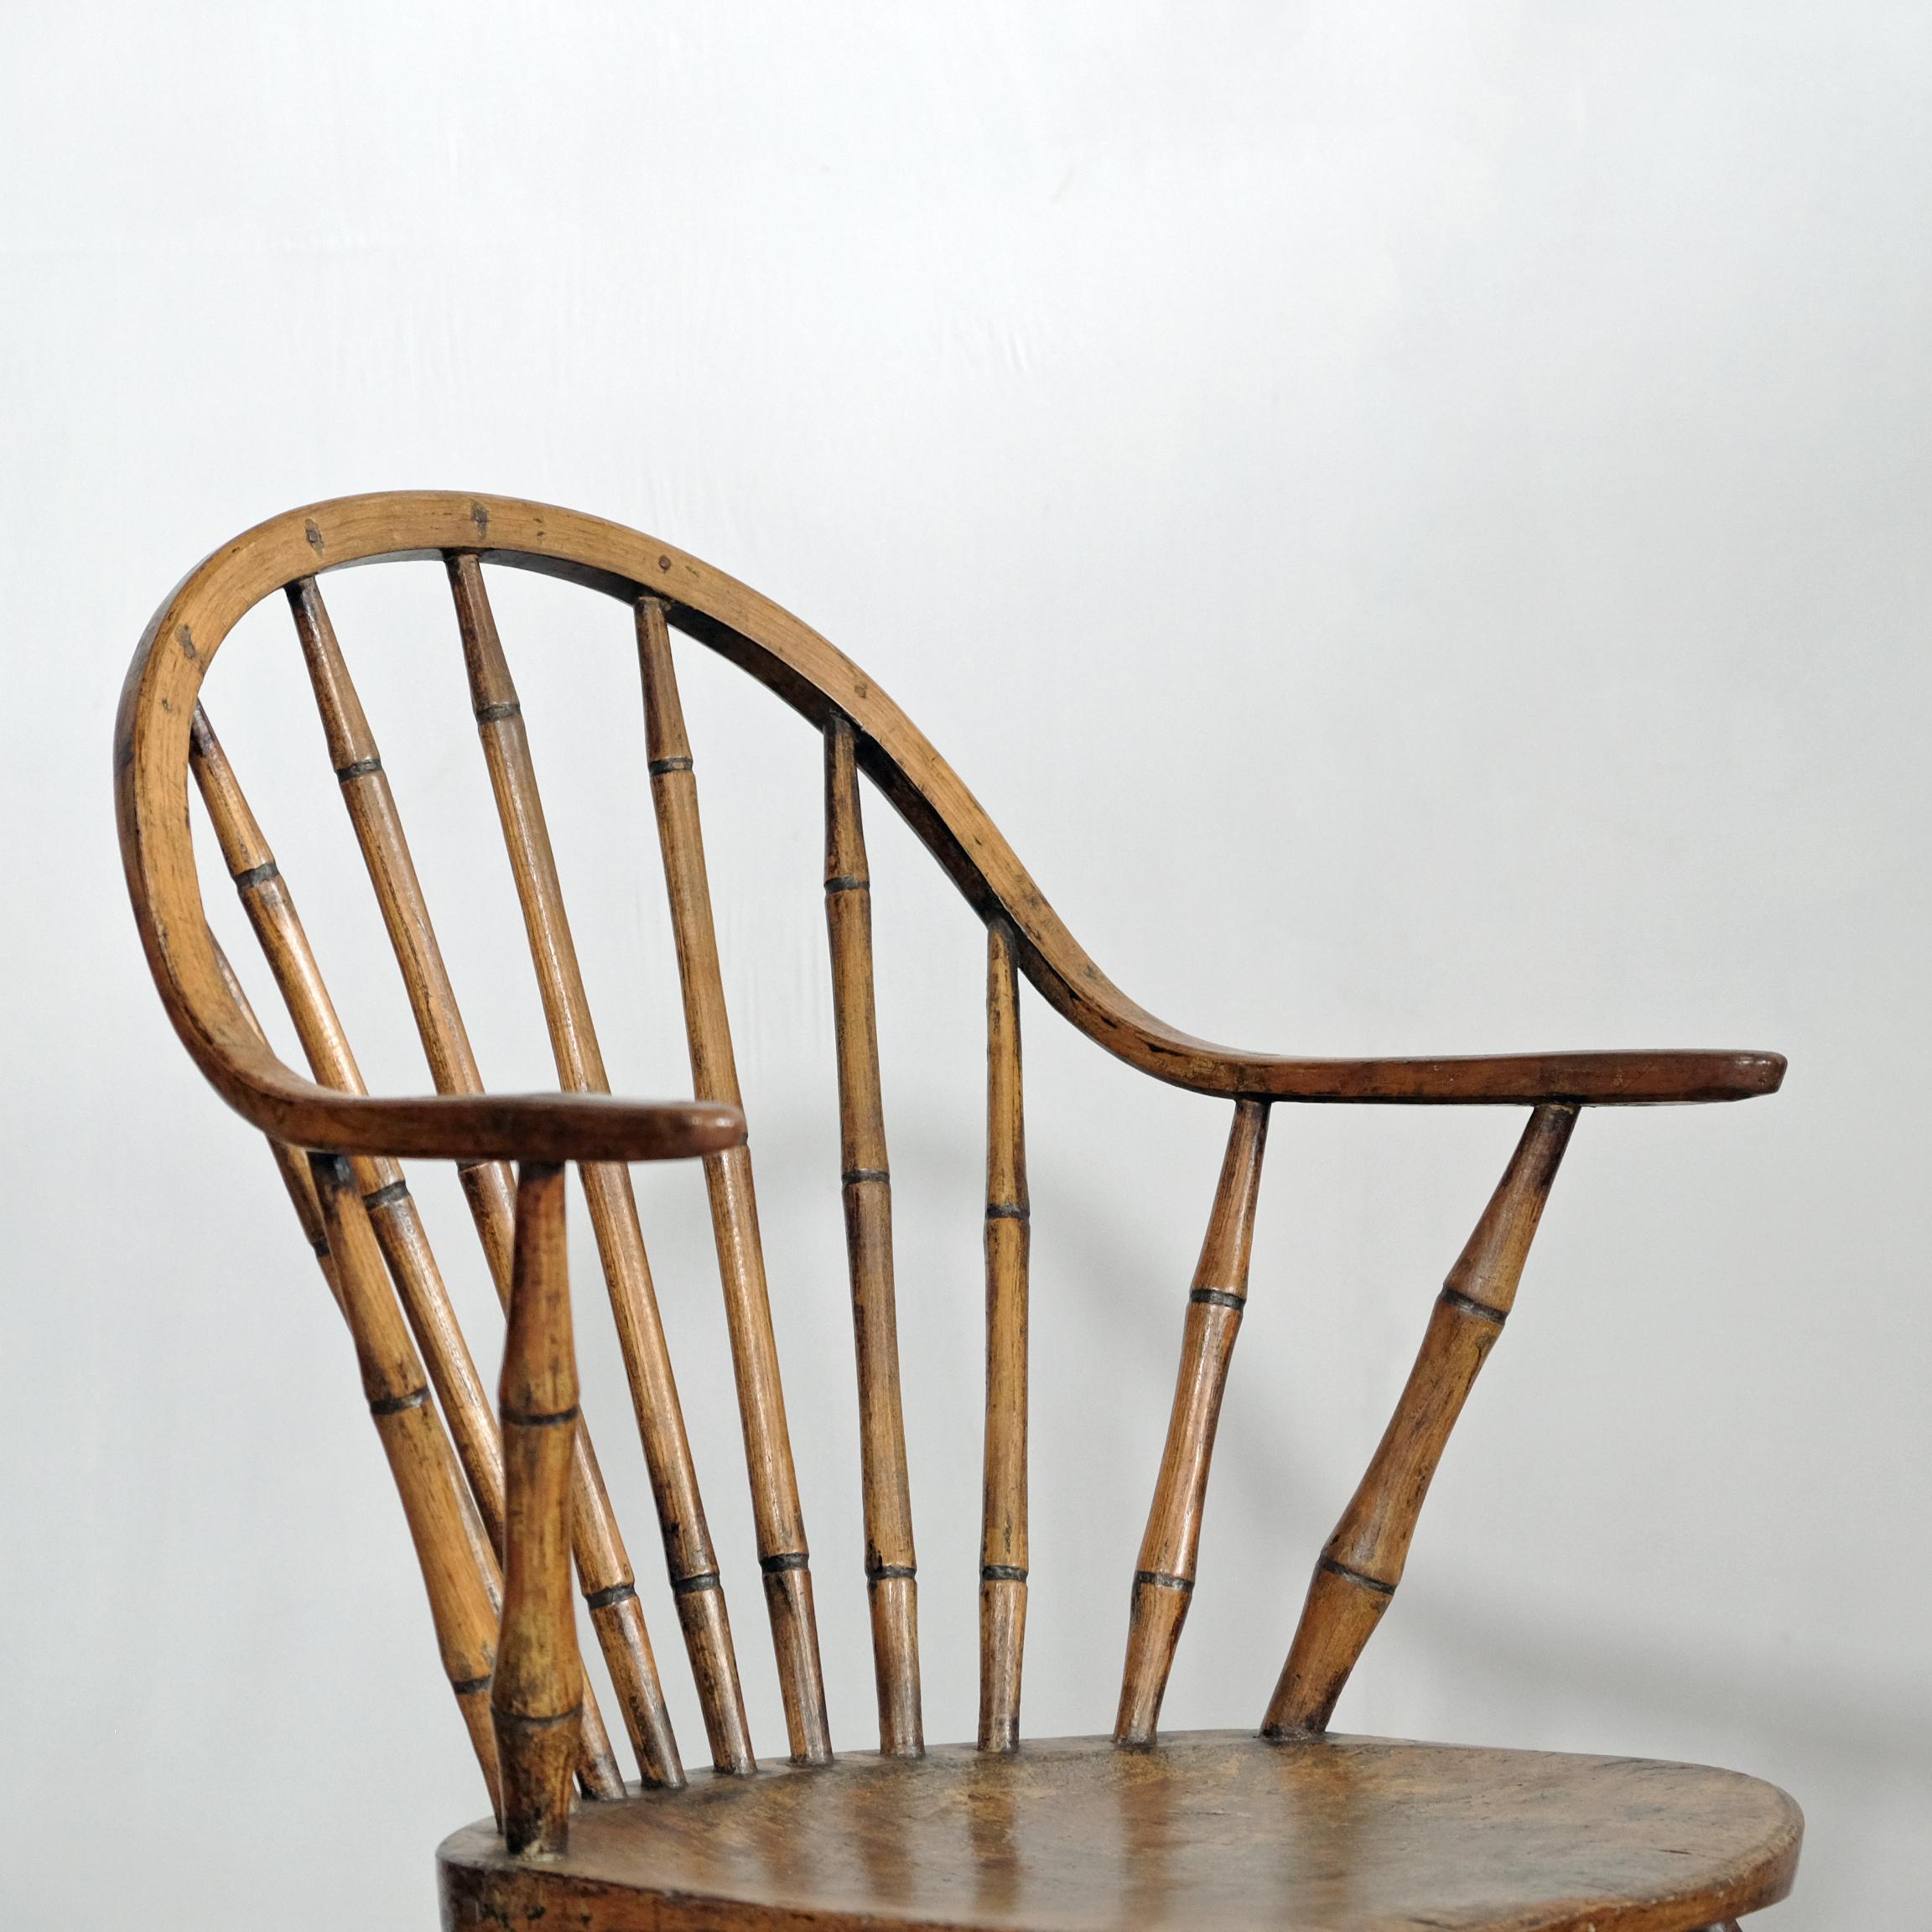 Continuous Arm Yealmpton Windsor Chair, English, Armchair, Original Paint, 1820s 4